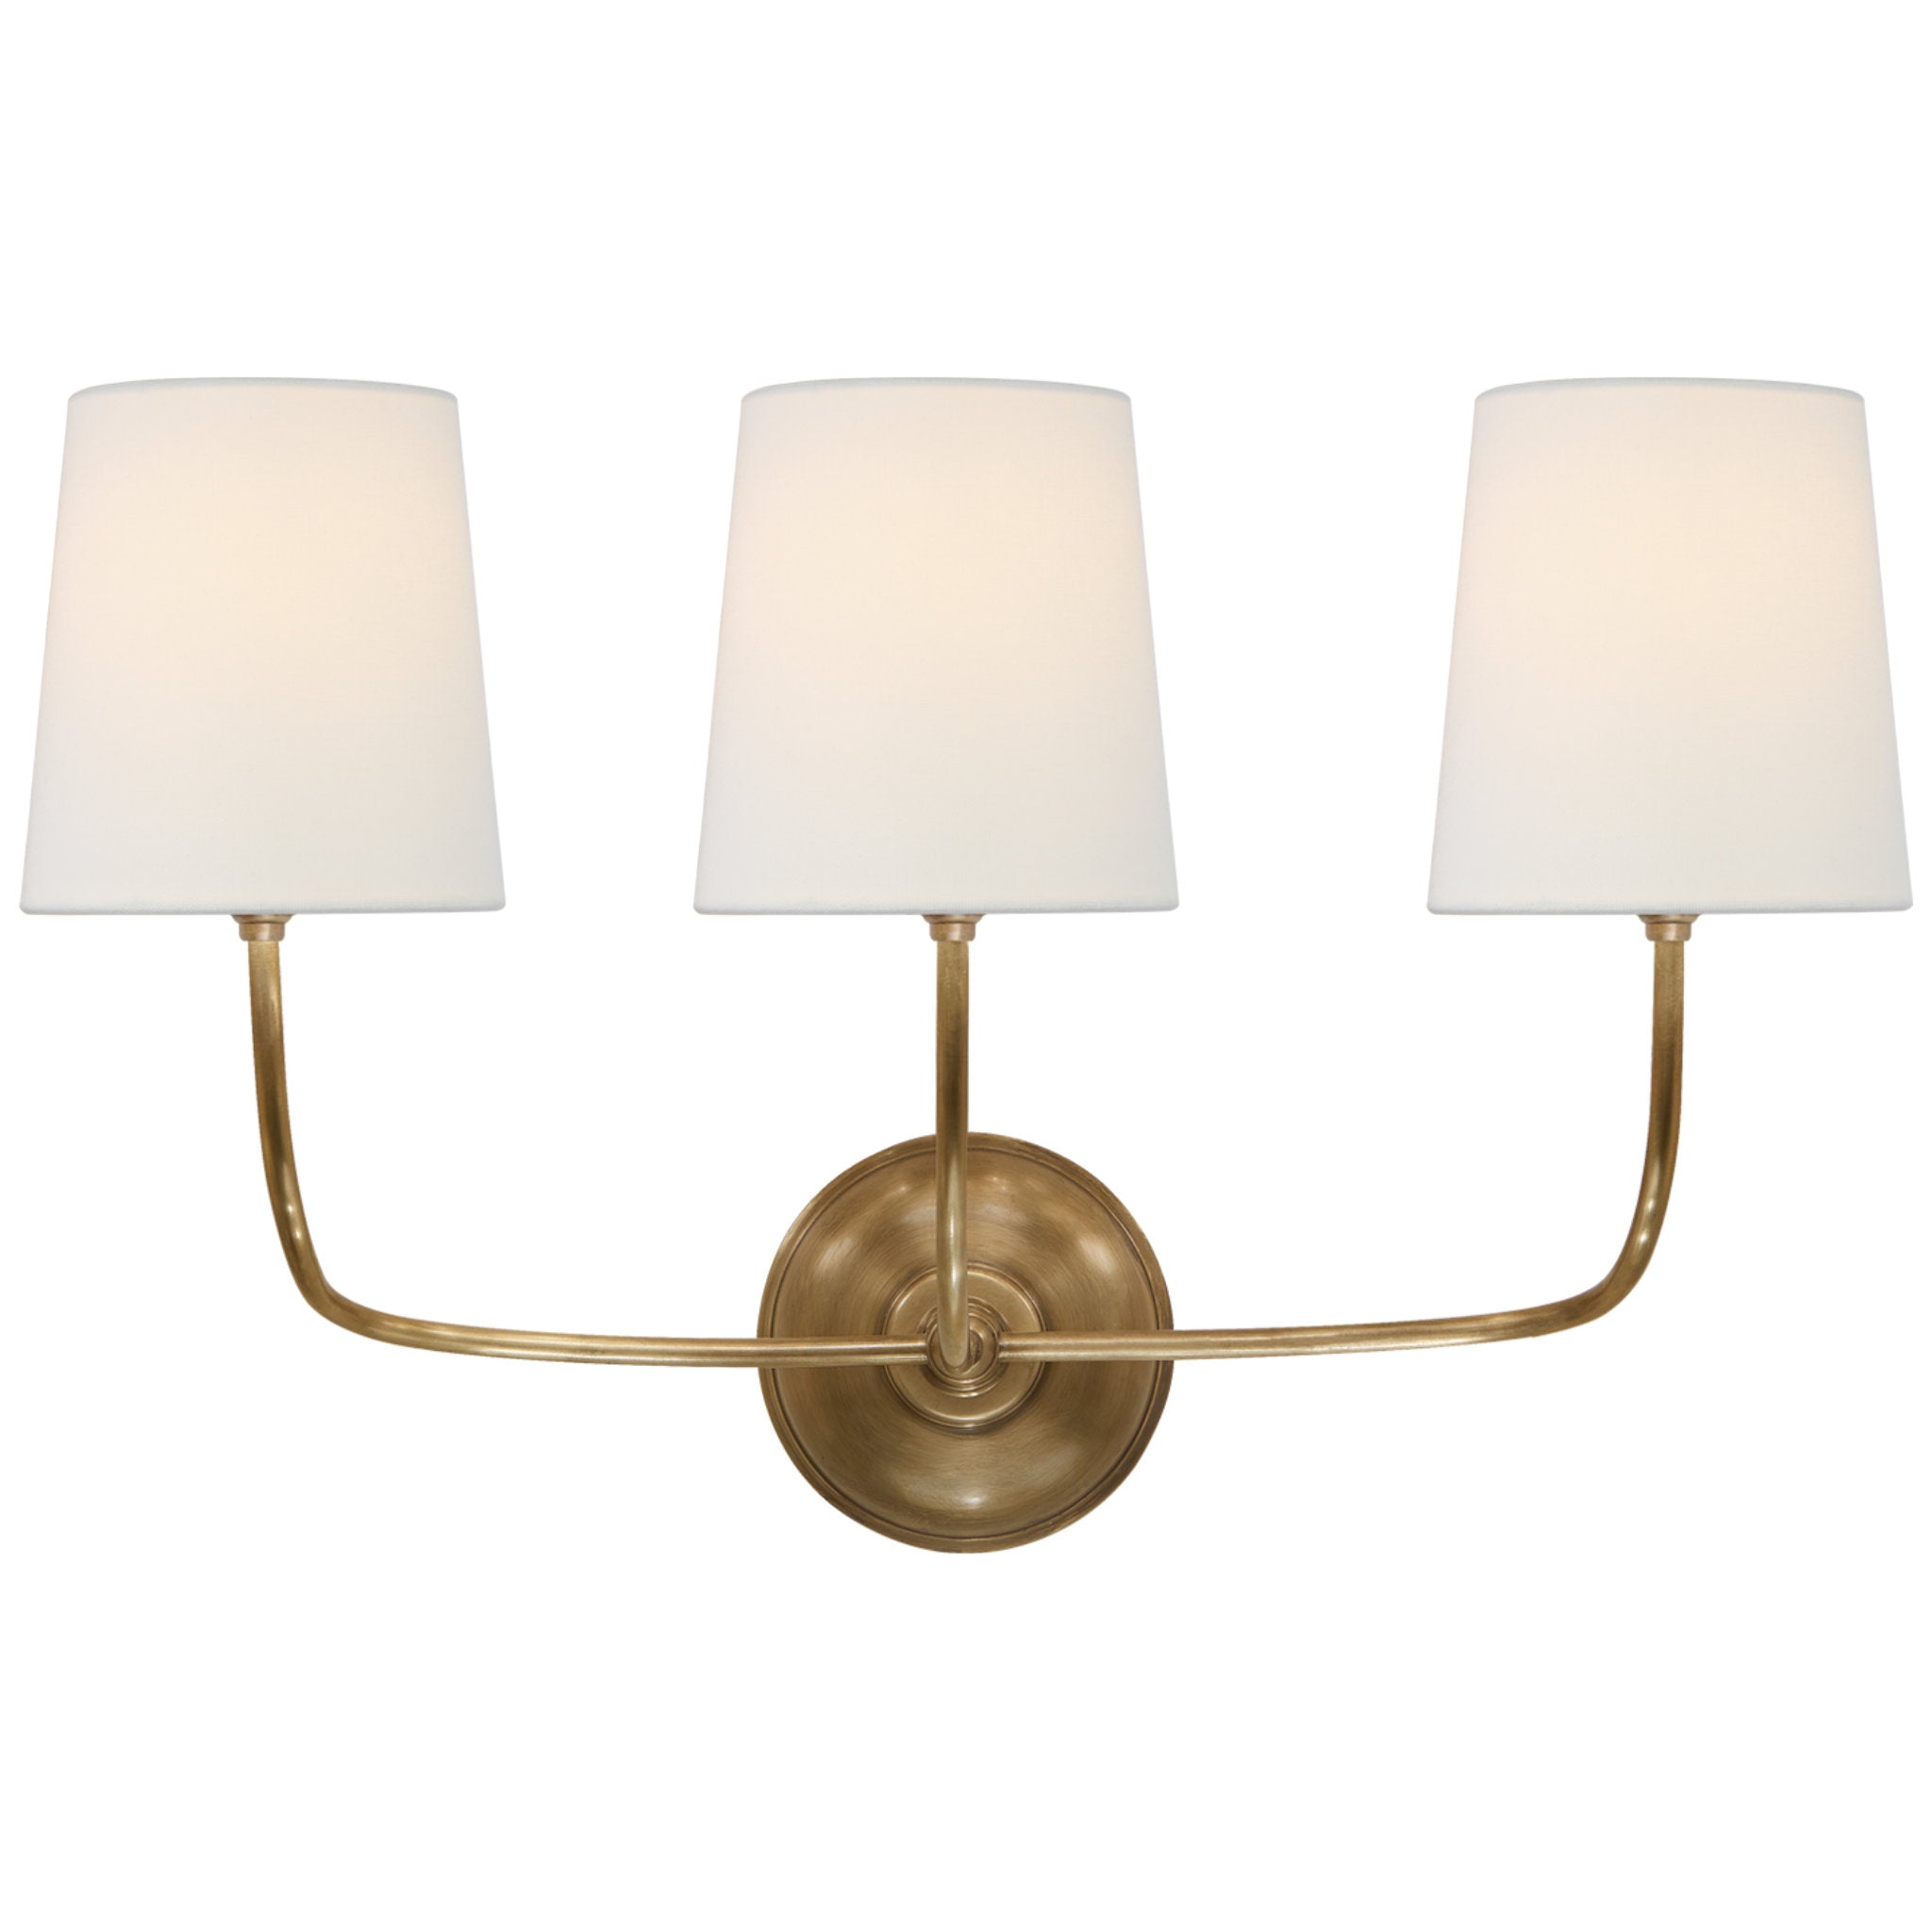 Thomas O'Brien Vendome Triple Sconce in Hand-Rubbed Antique Brass with Linen Shades